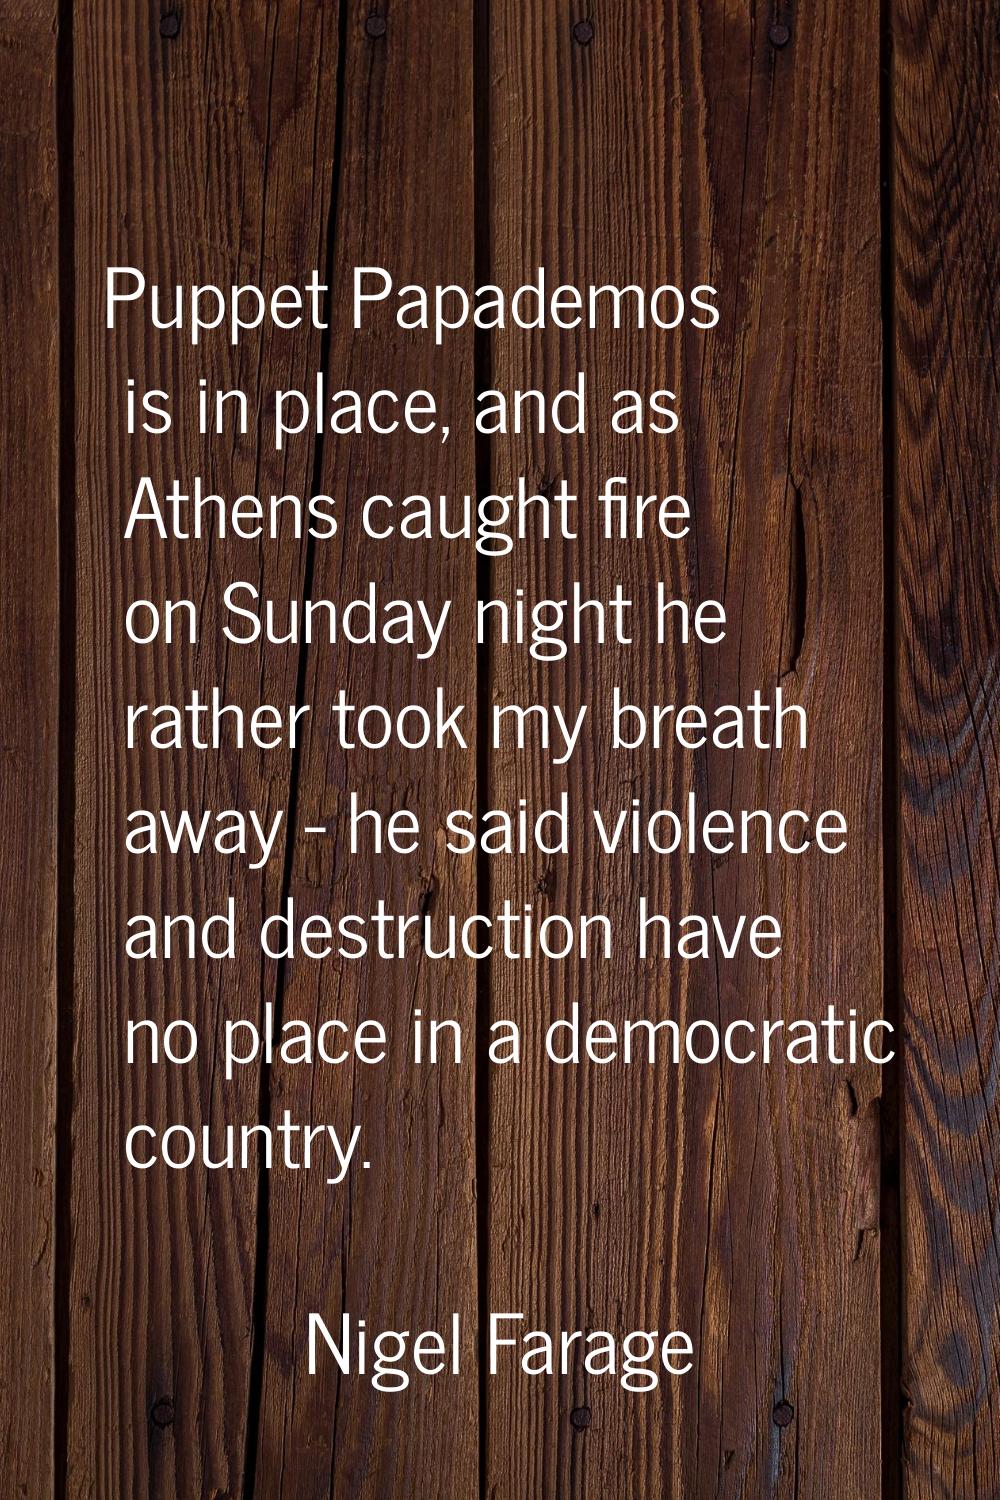 Puppet Papademos is in place, and as Athens caught fire on Sunday night he rather took my breath aw